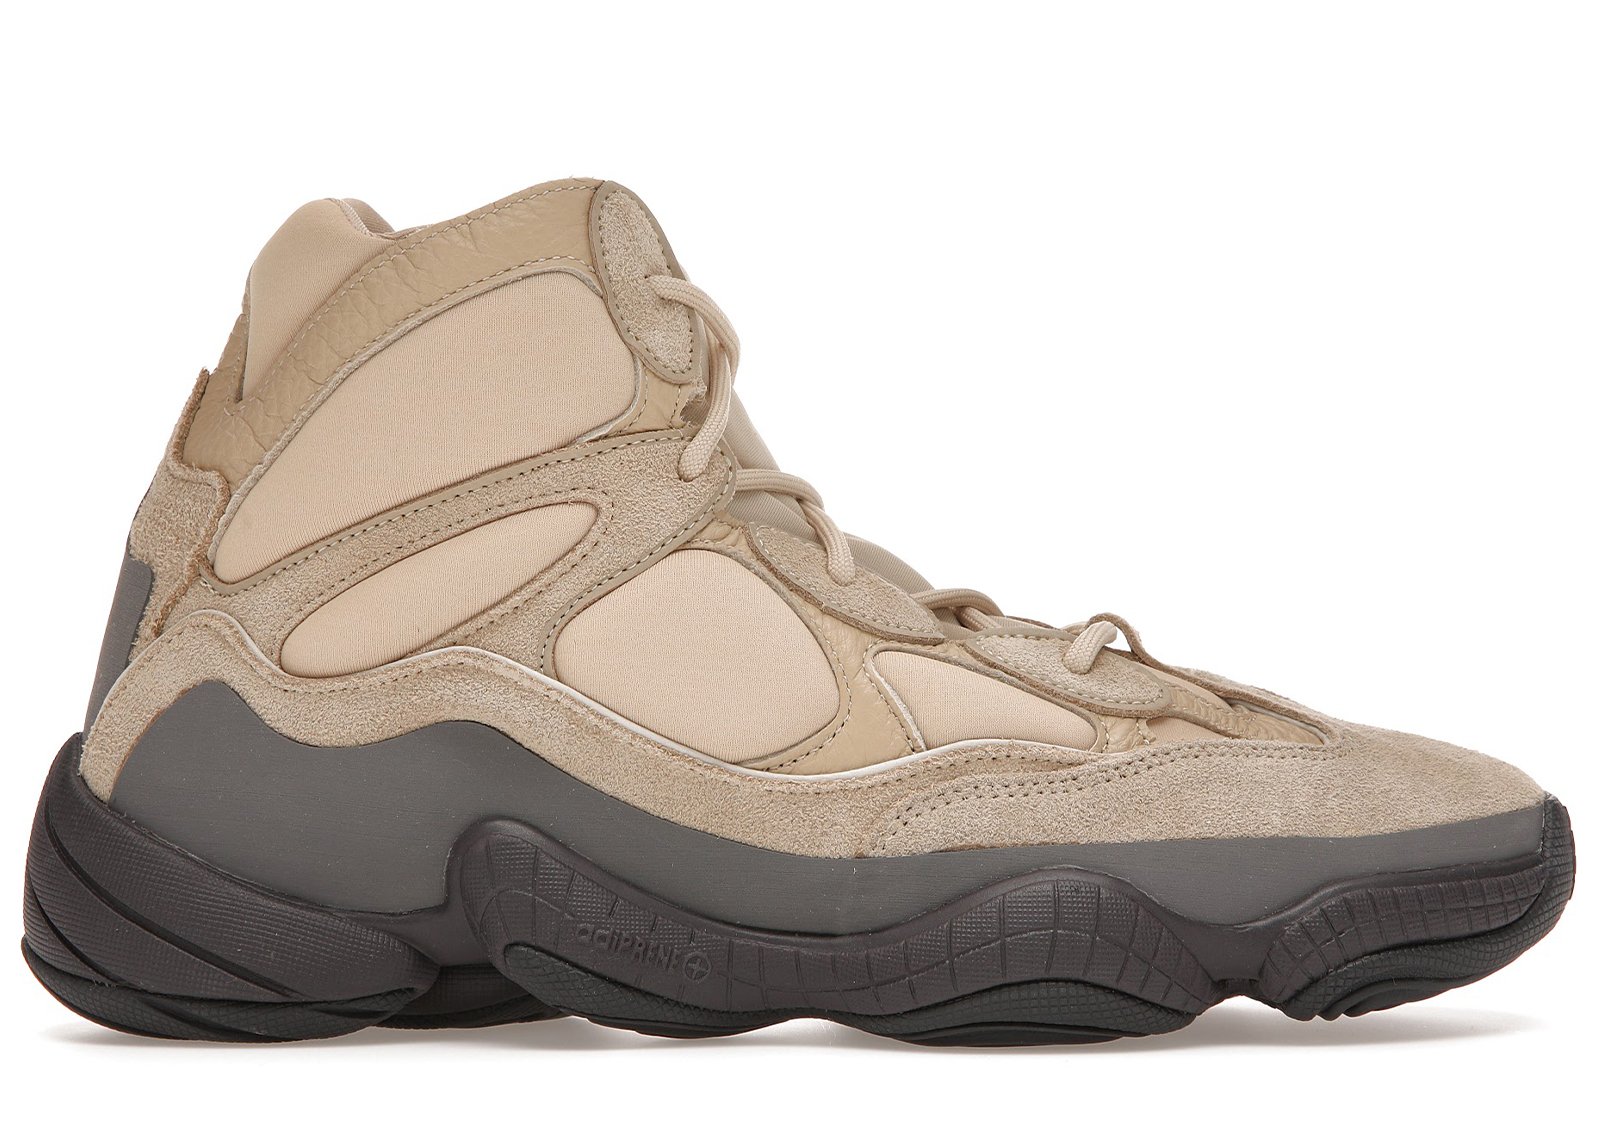 adidas Yeezy 500 High Shale Warm sneakers